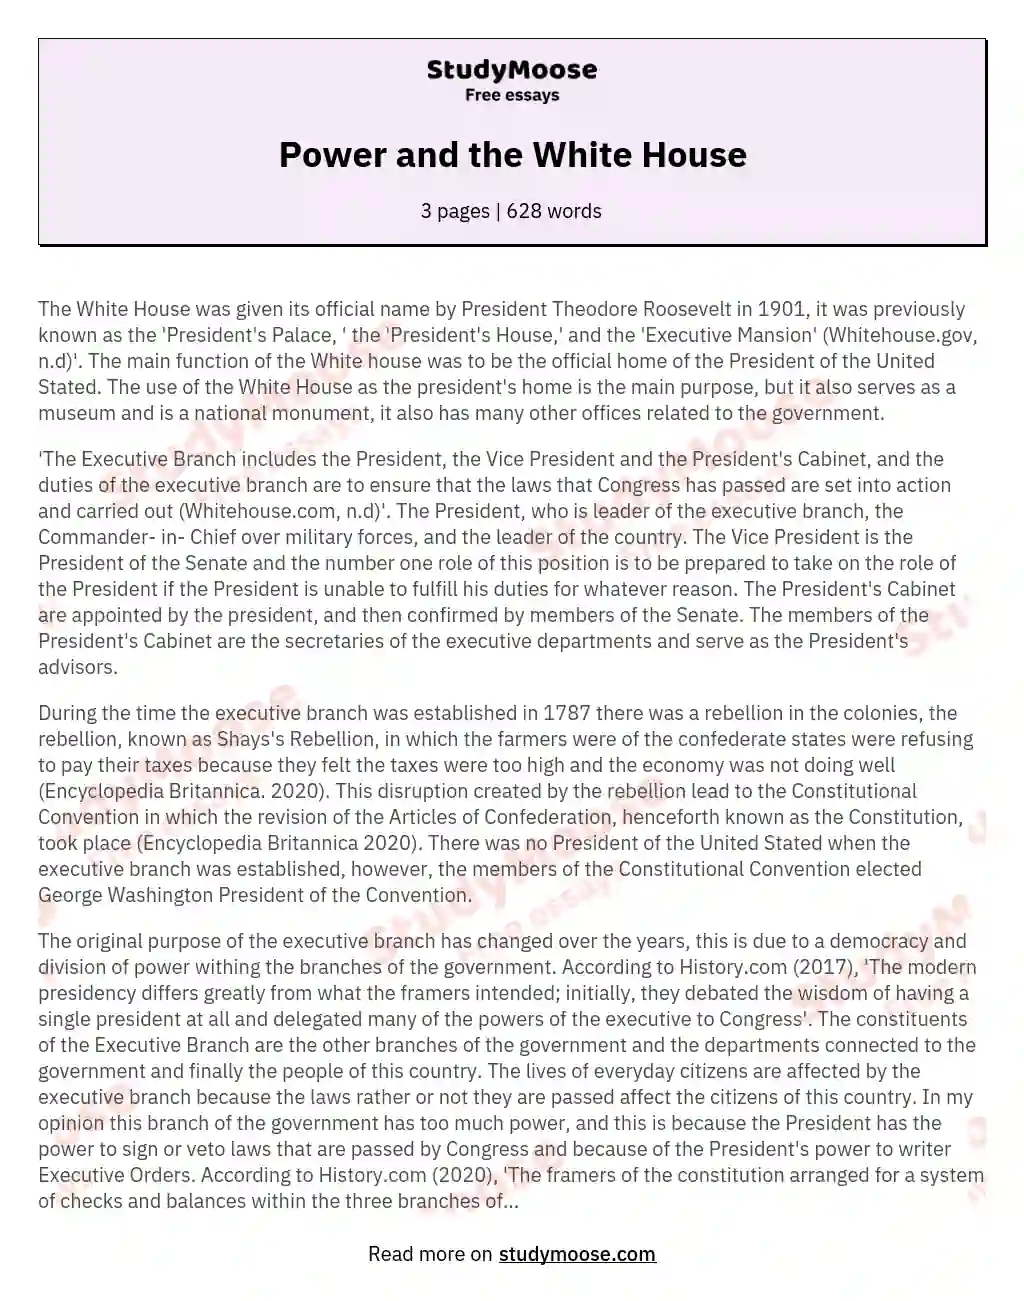 Power and the White House essay